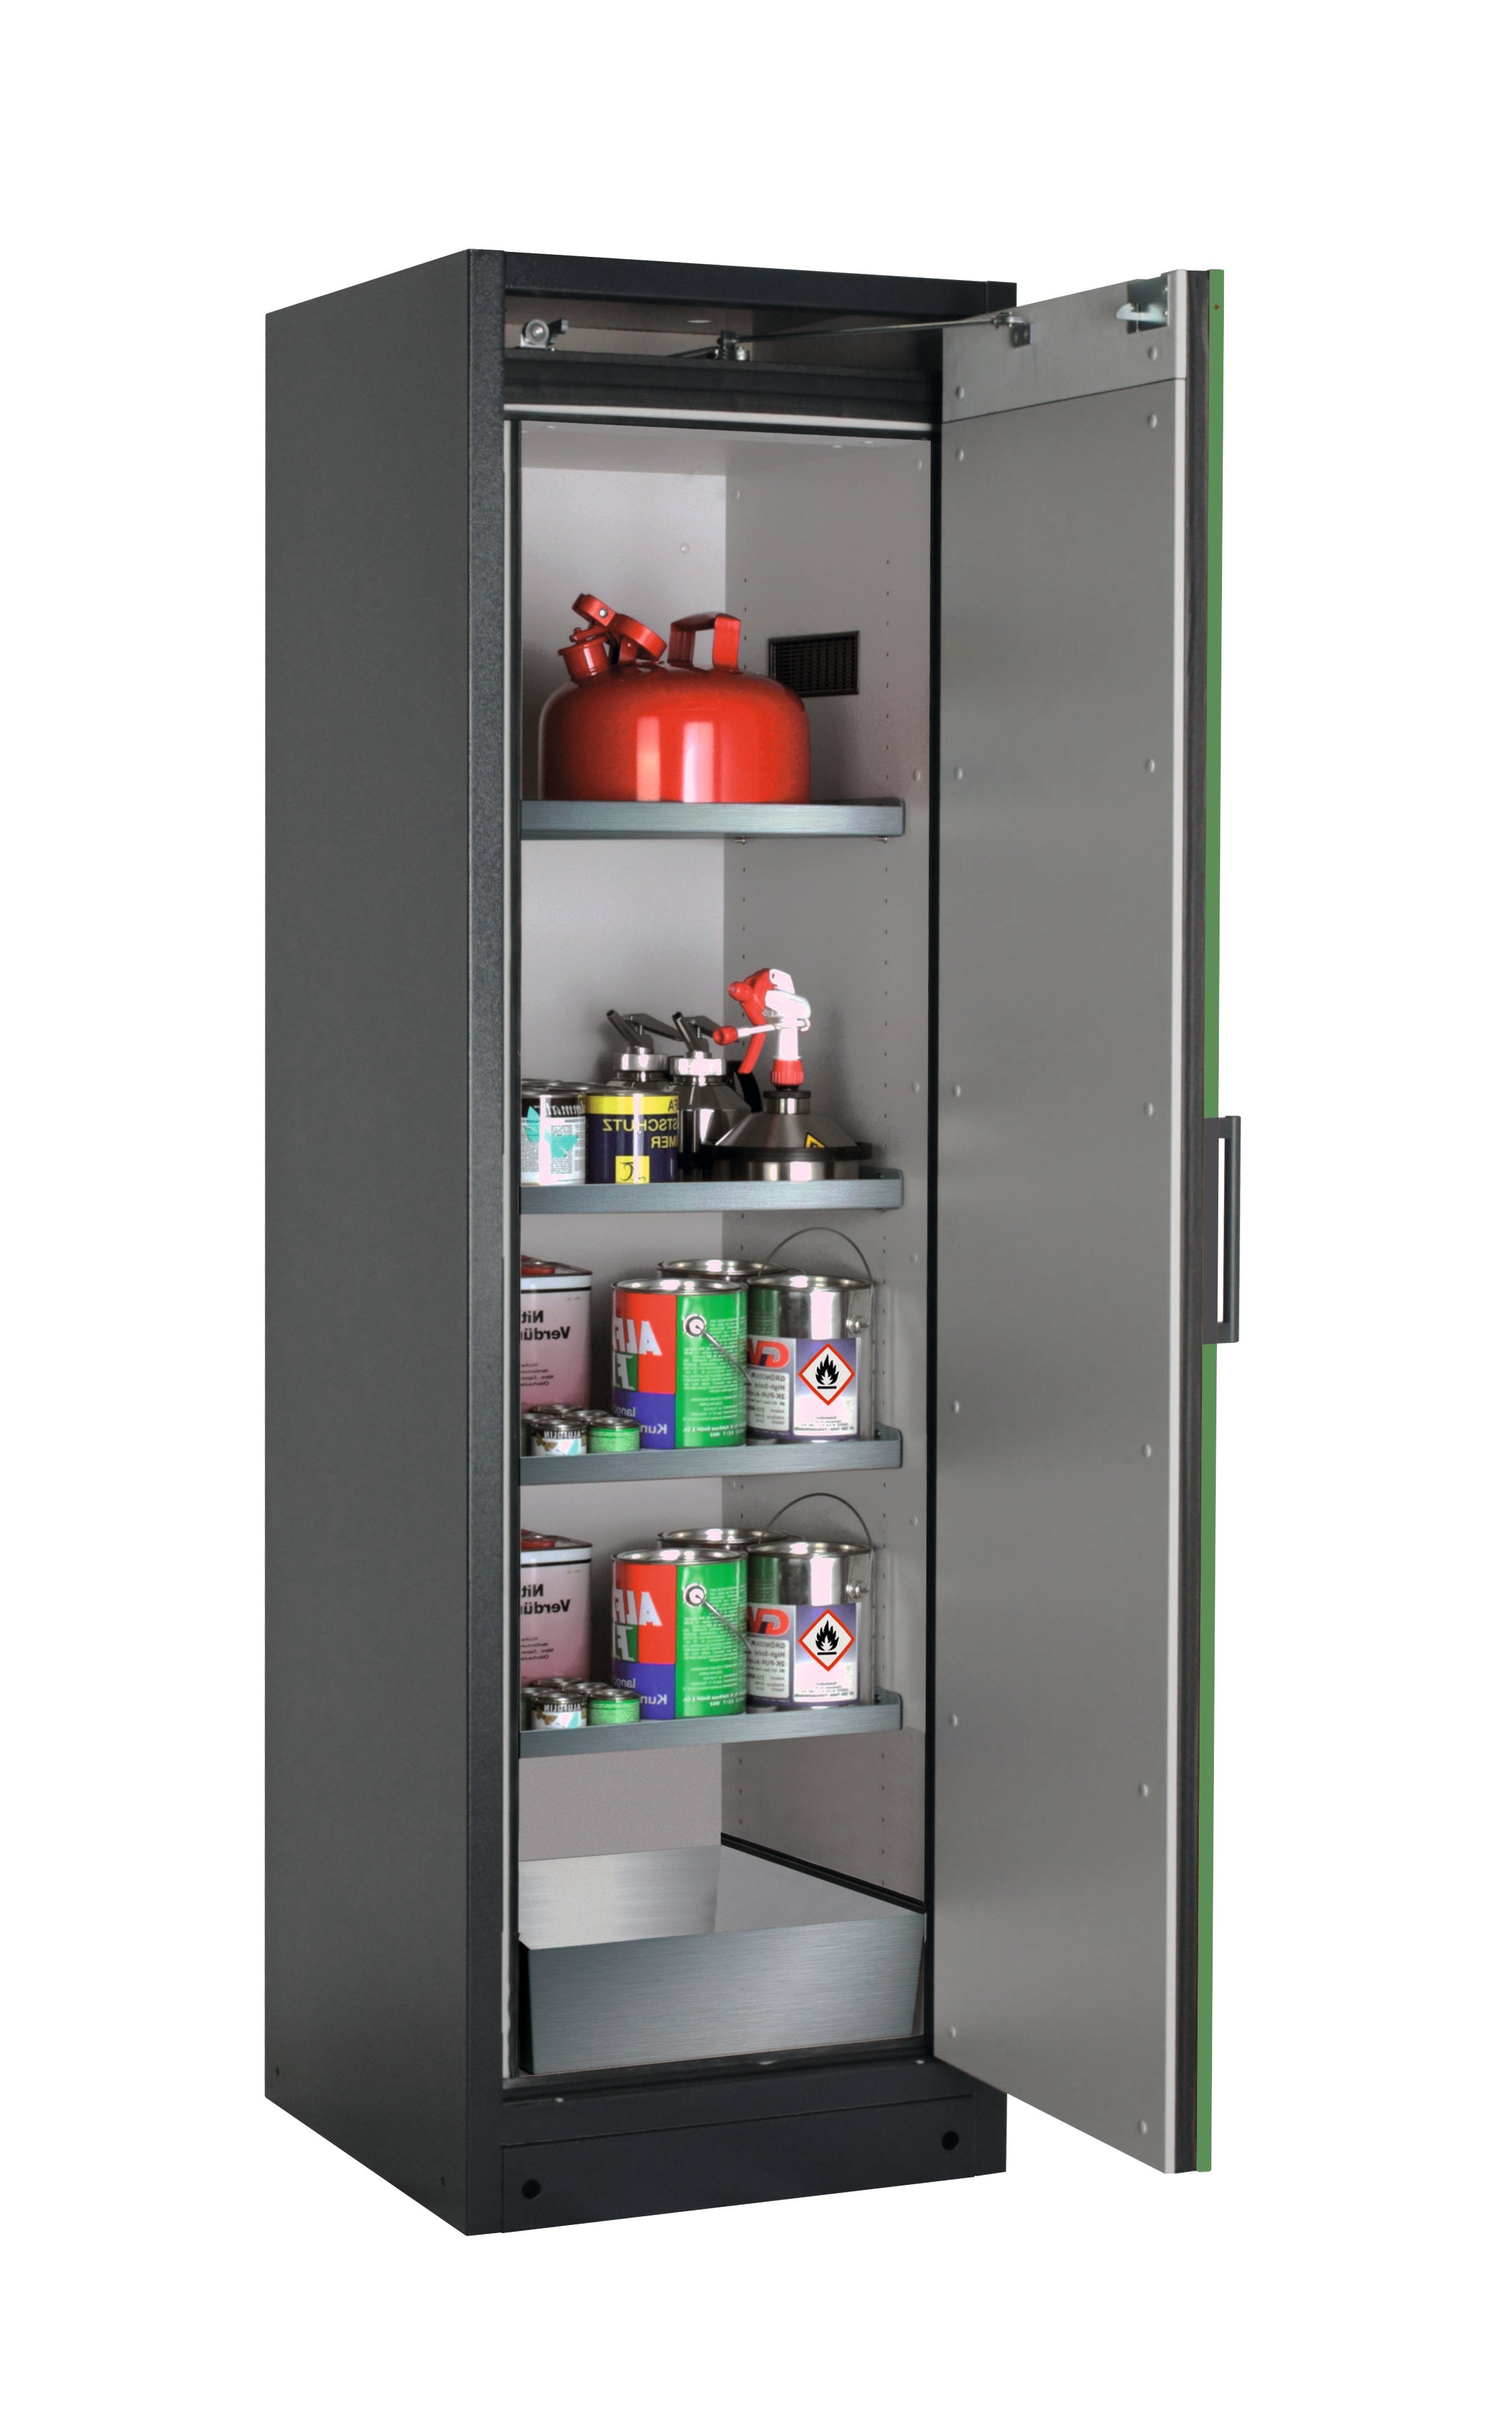 Type 90 safety storage cabinet Q-CLASSIC-90 model Q90.195.060.R in reseda green RAL 6011 with 4x shelf standard (stainless steel 1.4301),